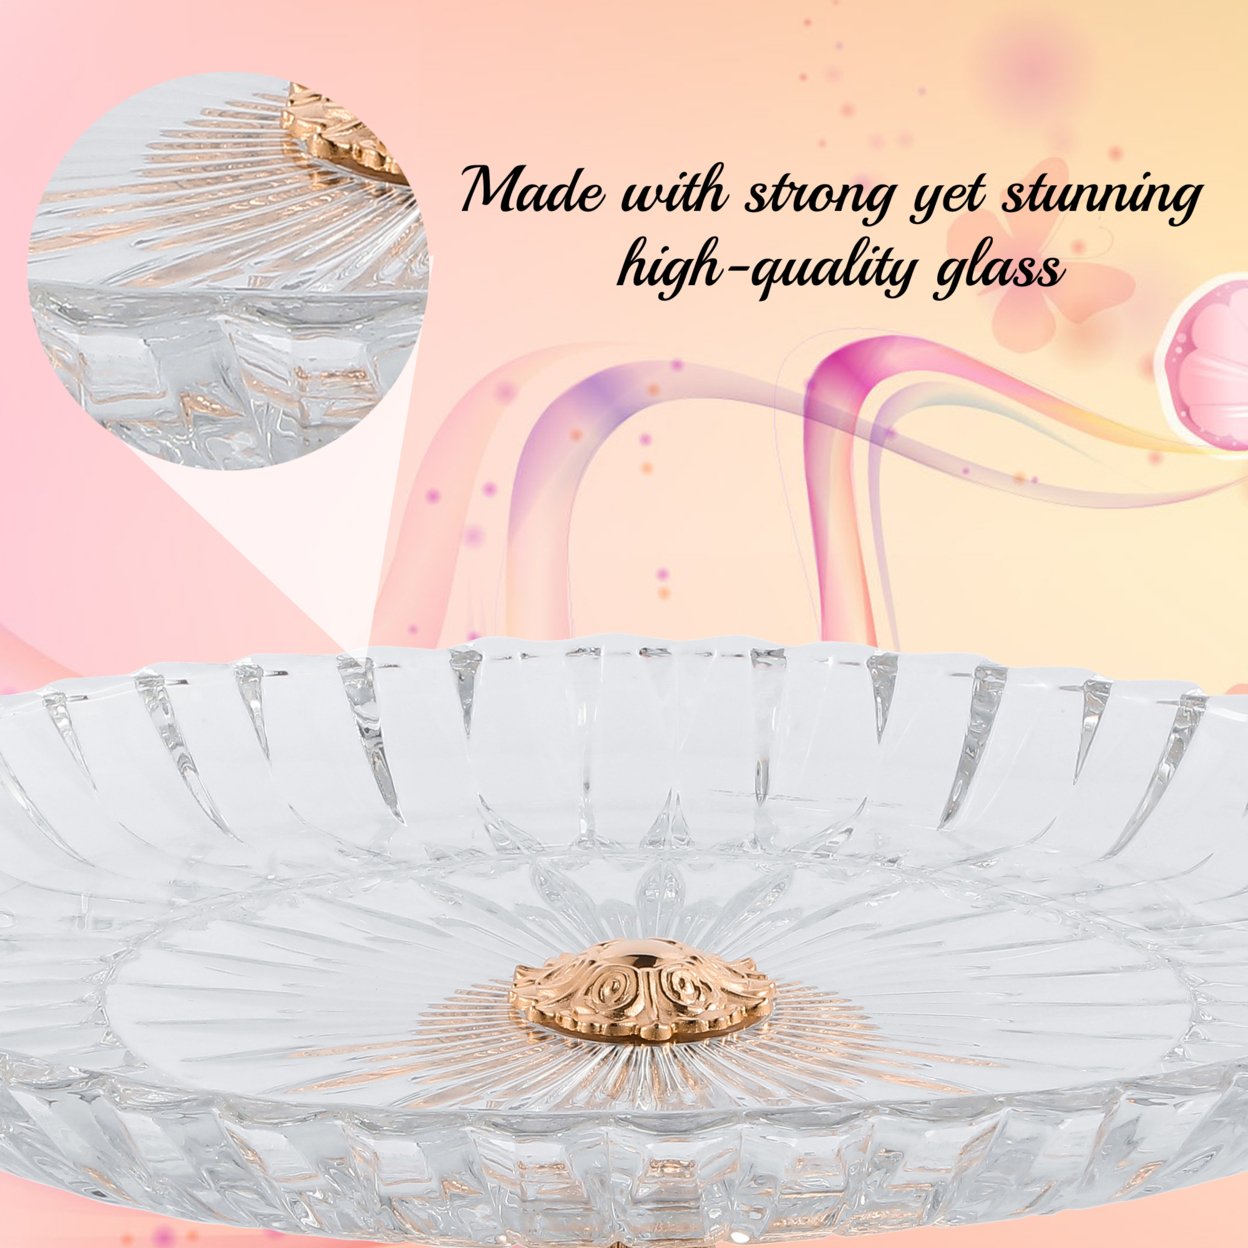 Matashi Cake Plate Centerpiece Decorative Dish, Round Serving Platter W Rose Gold Plated Pedestal Base For Weddings Parties Tabletop